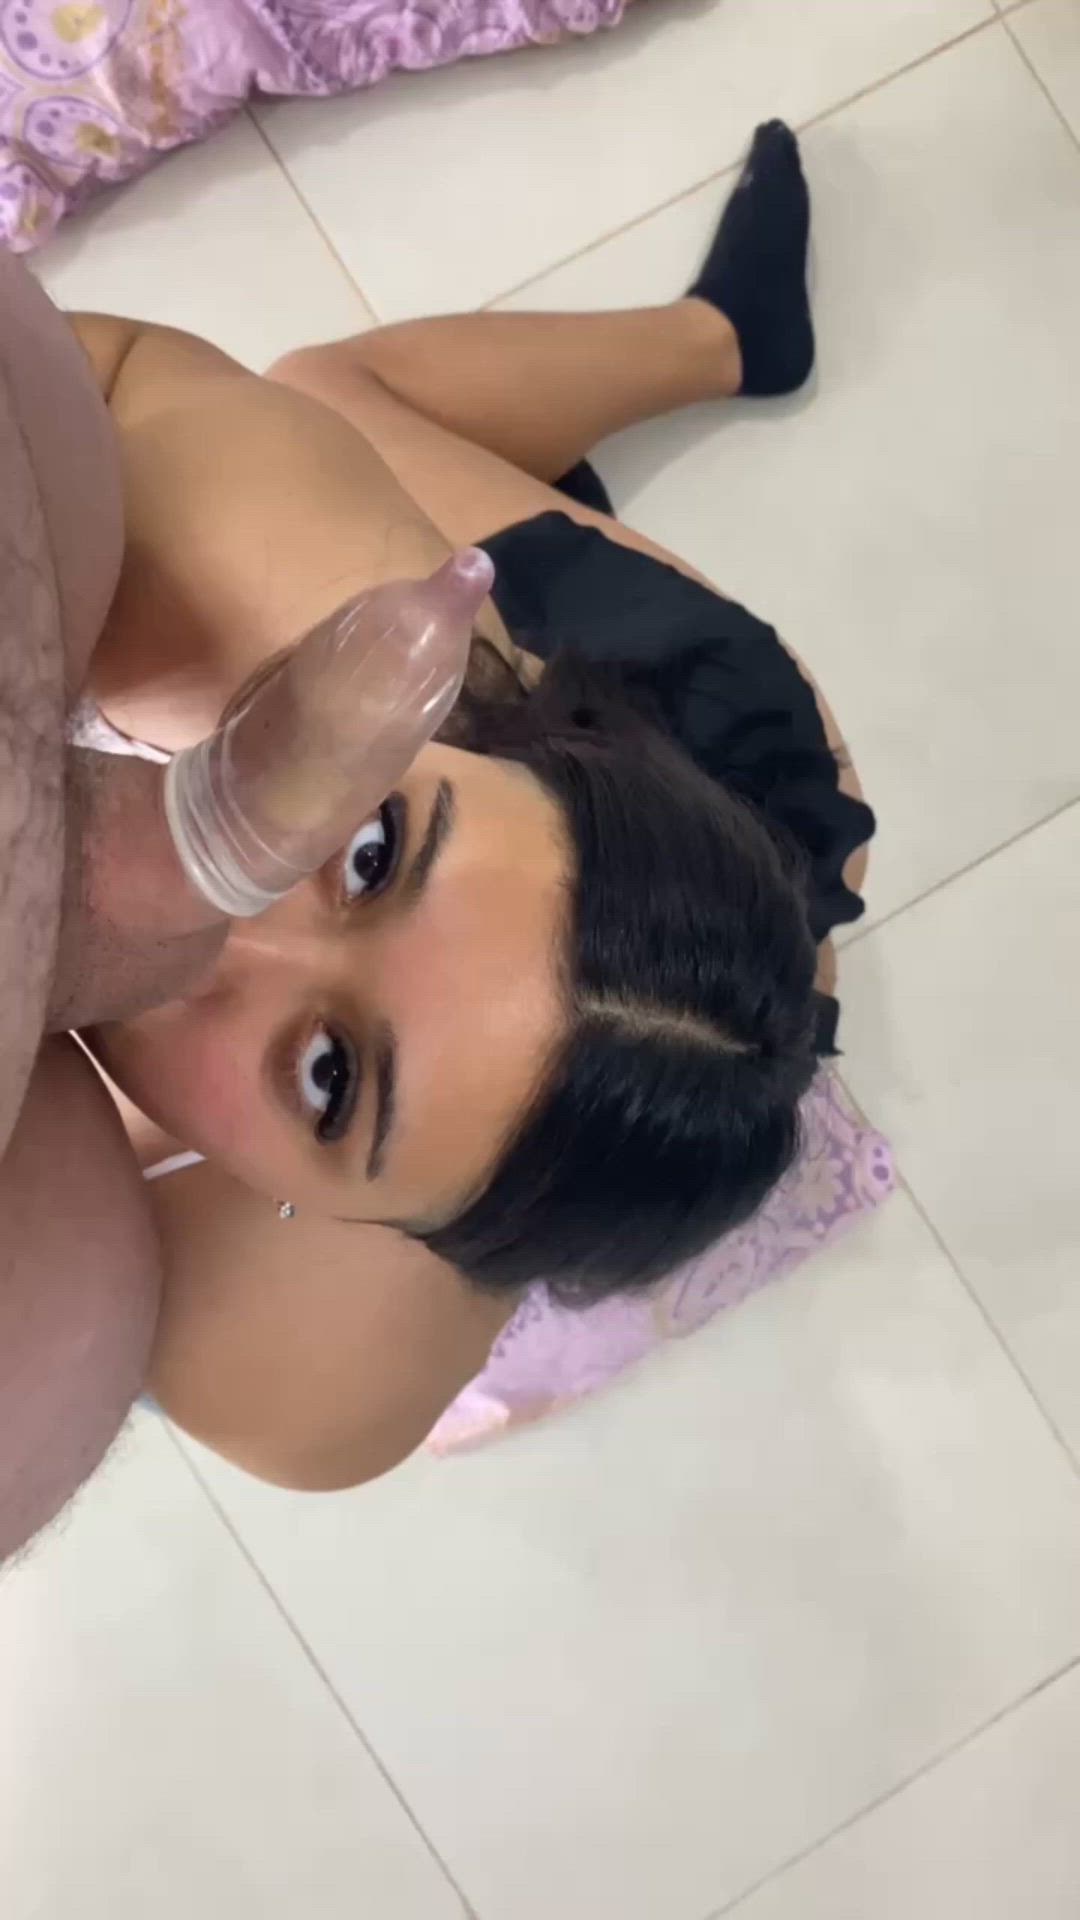 Amateur porn video with onlyfans model Aruu Mailen Juarez <strong>@tunena222</strong>